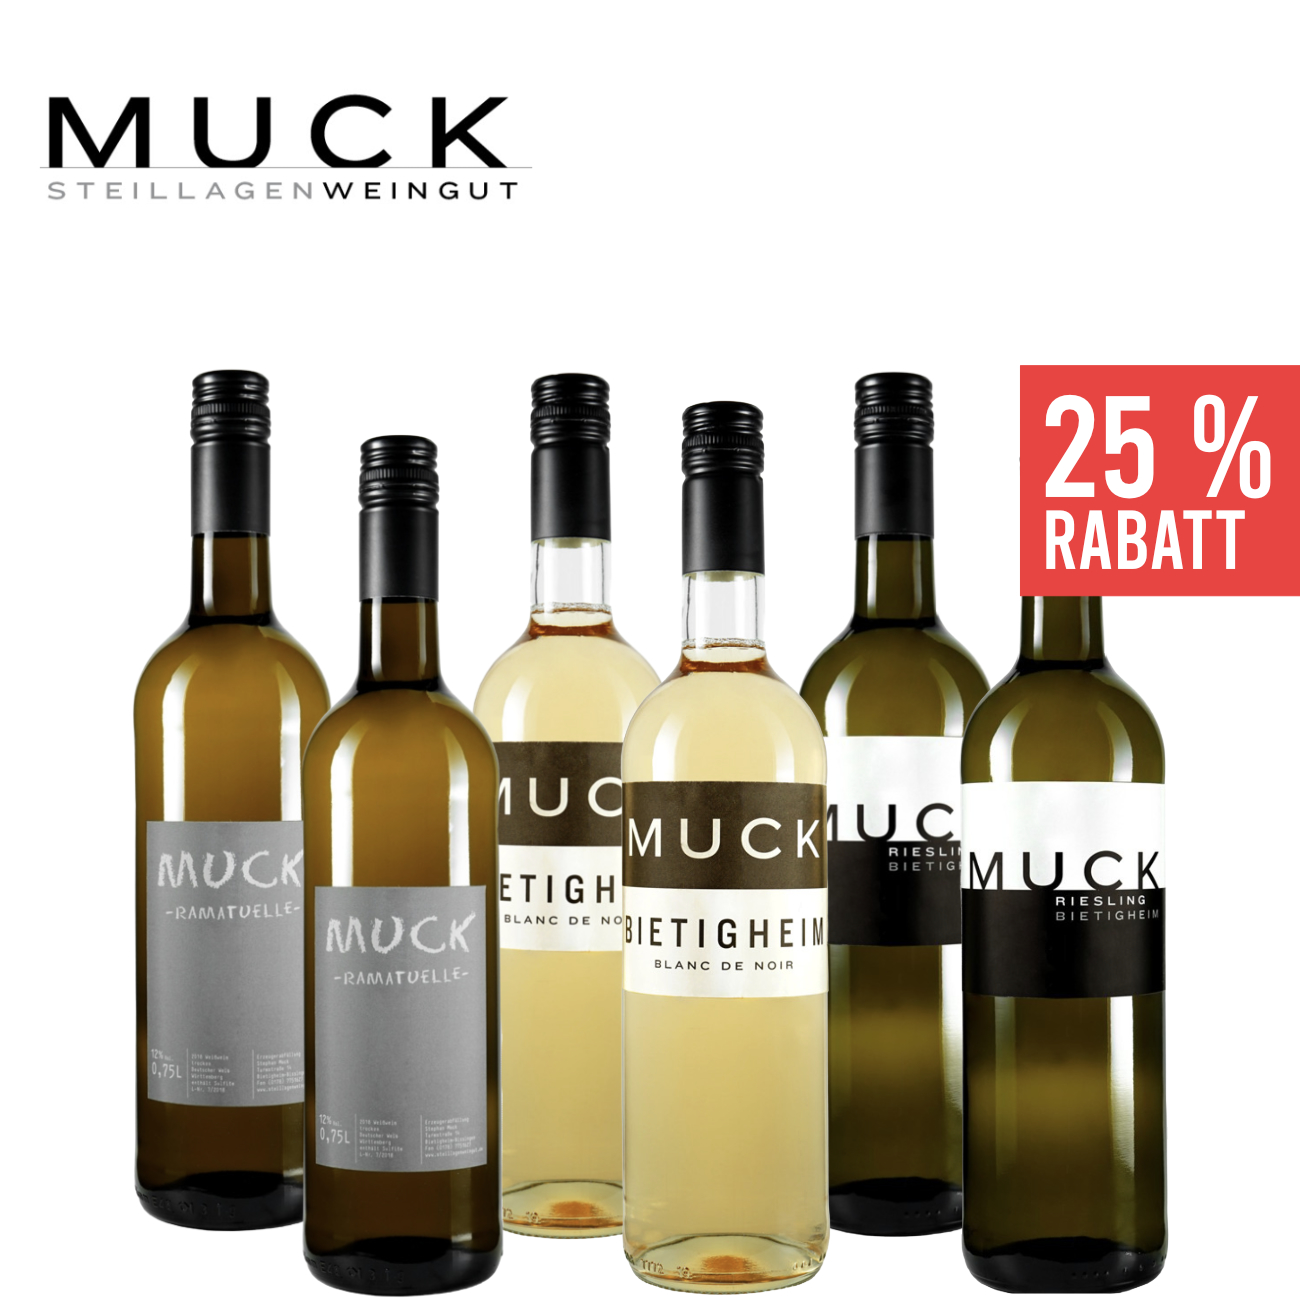 wines wein.plus our wein.plus members | of Find+Buy: The Find+Buy